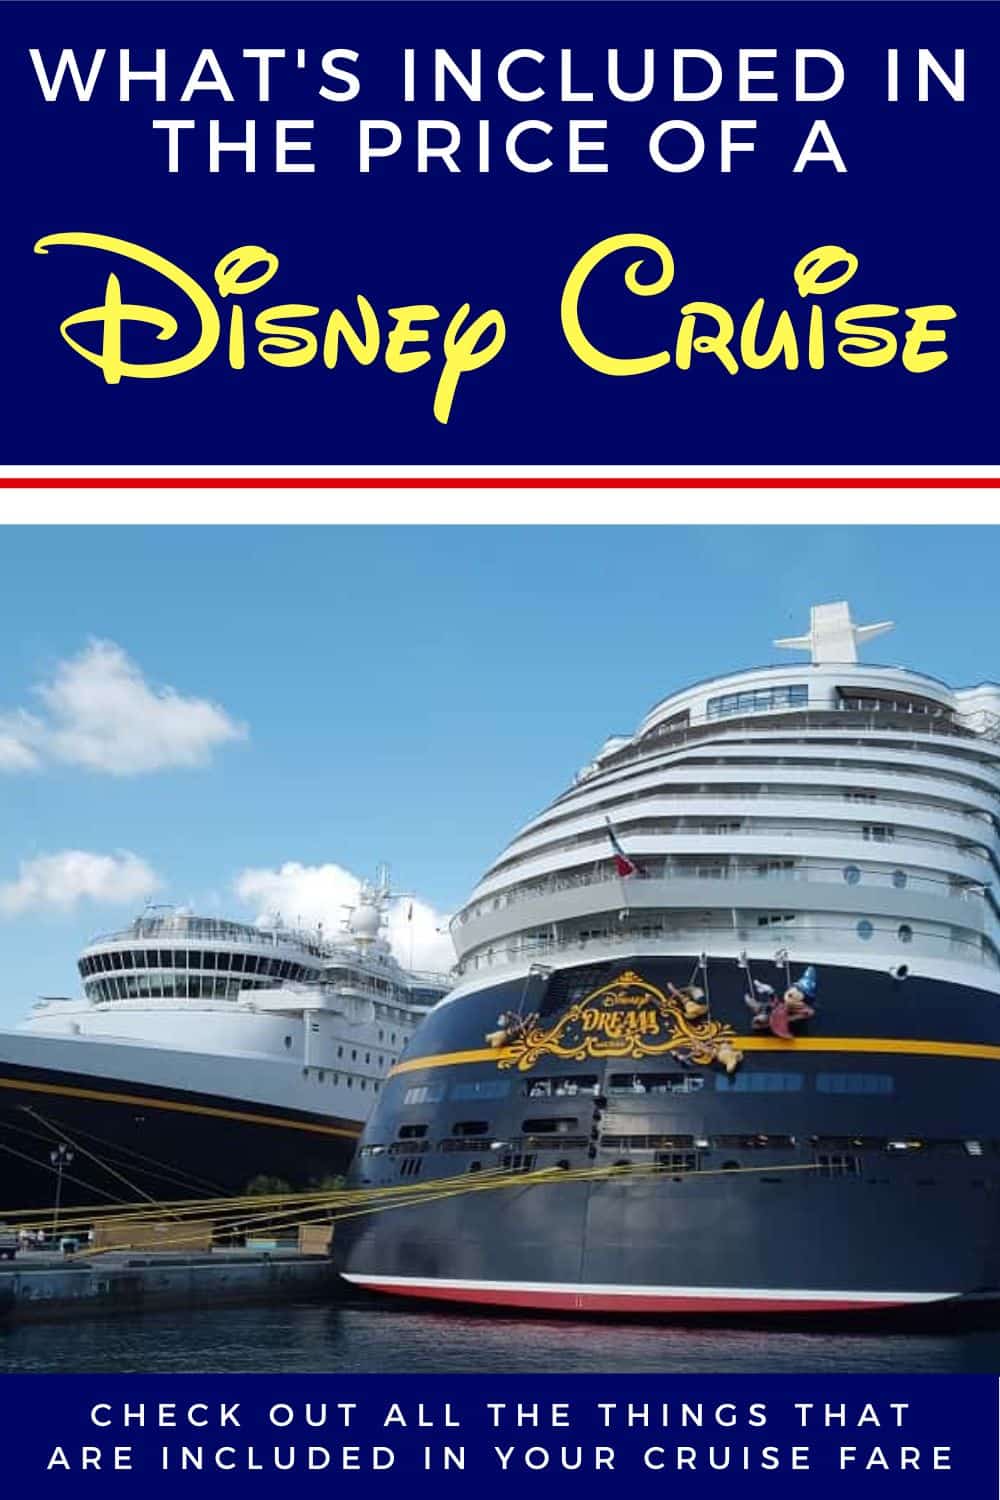 What is Included in a Disney Cruise